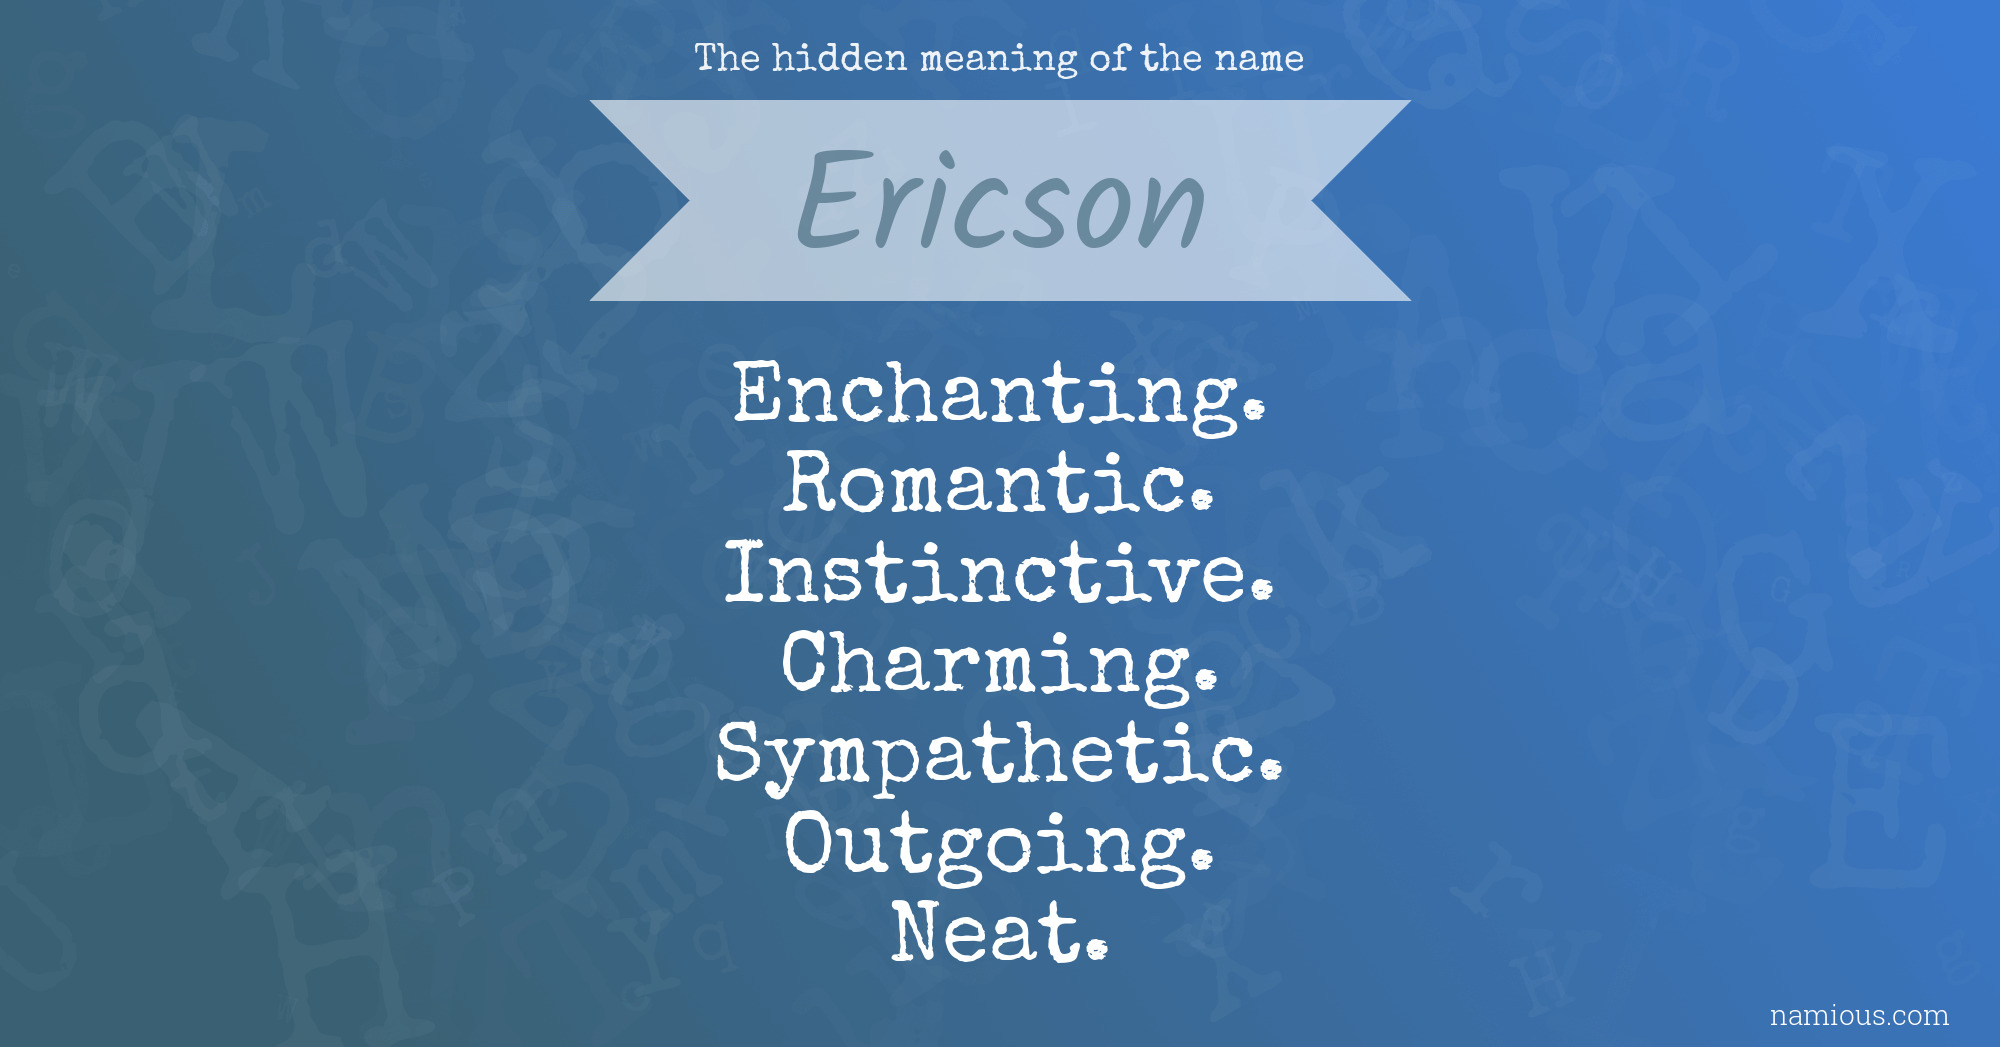 The hidden meaning of the name Ericson